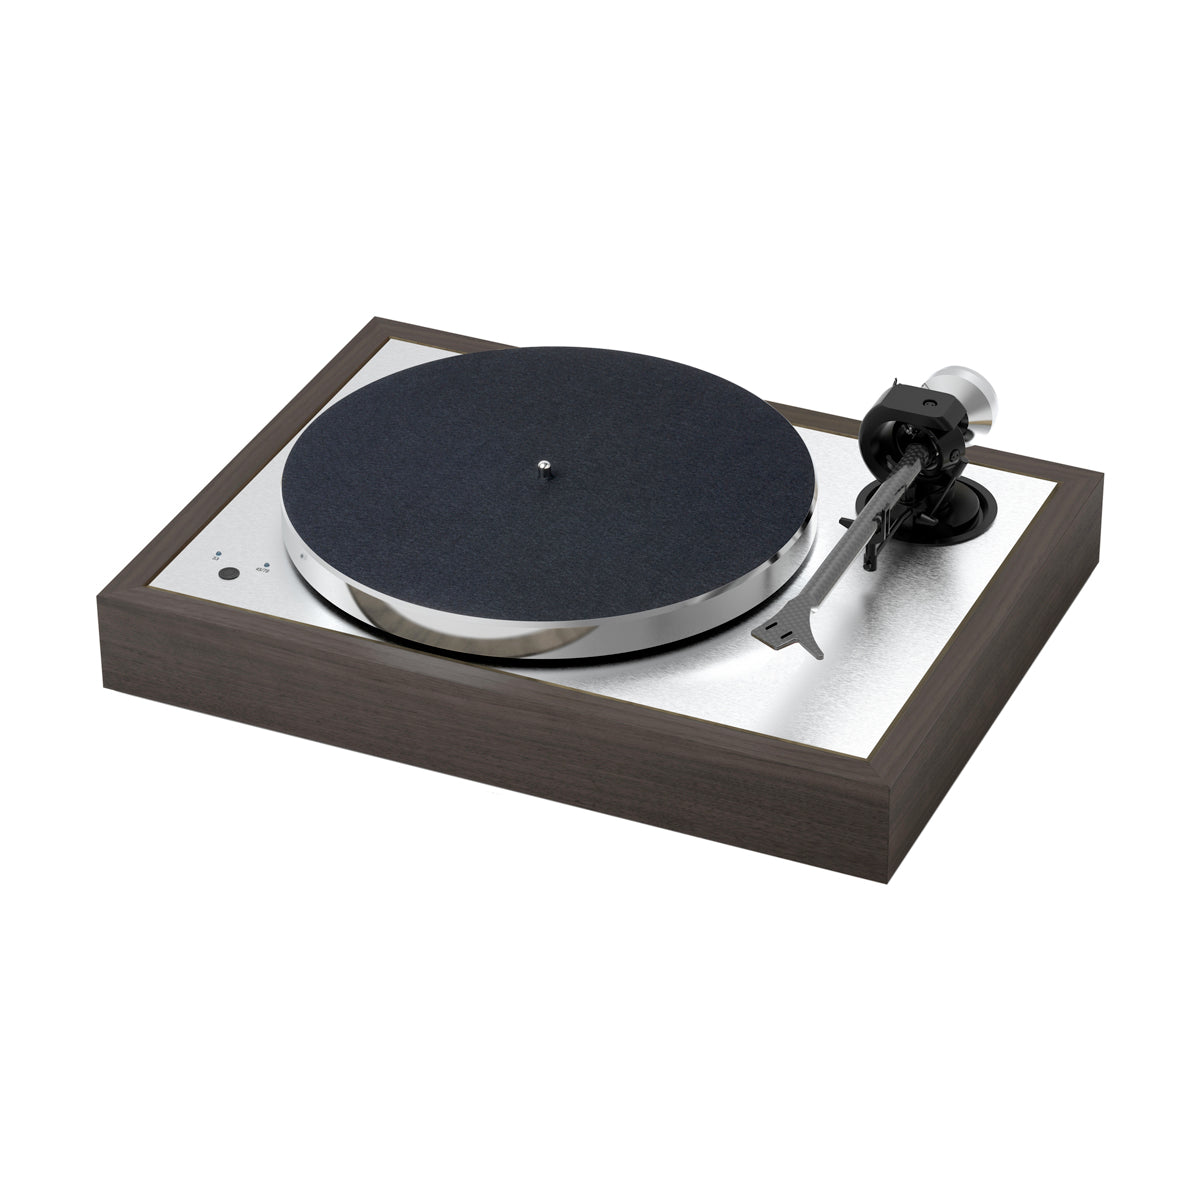 Pro-Ject The Classic Evo Turntable - The Audio Experts